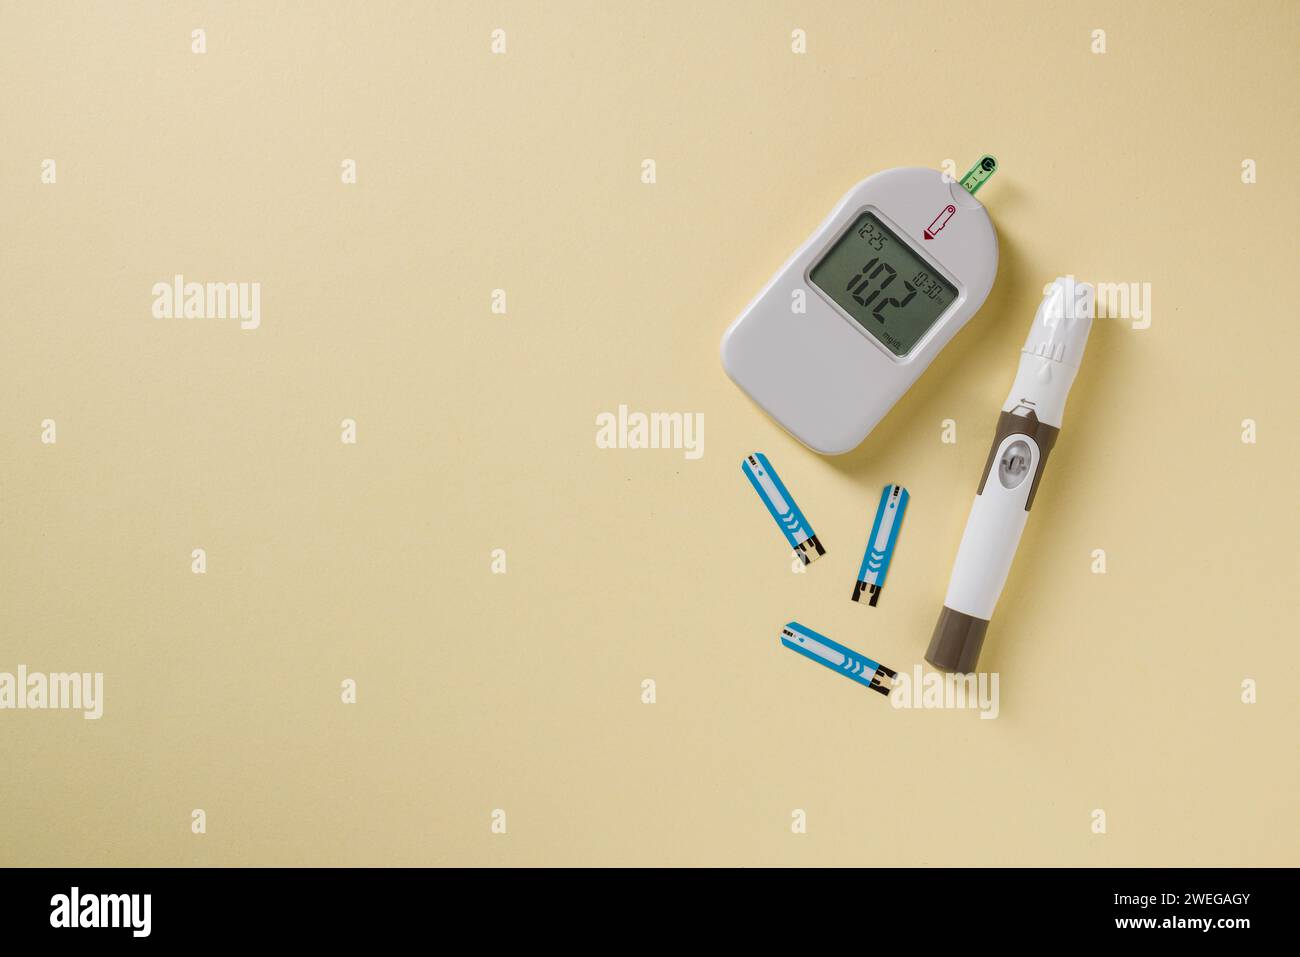 Top view of glucometer, lancet pen and strips on yellow background. diabetes test kit Stock Photo